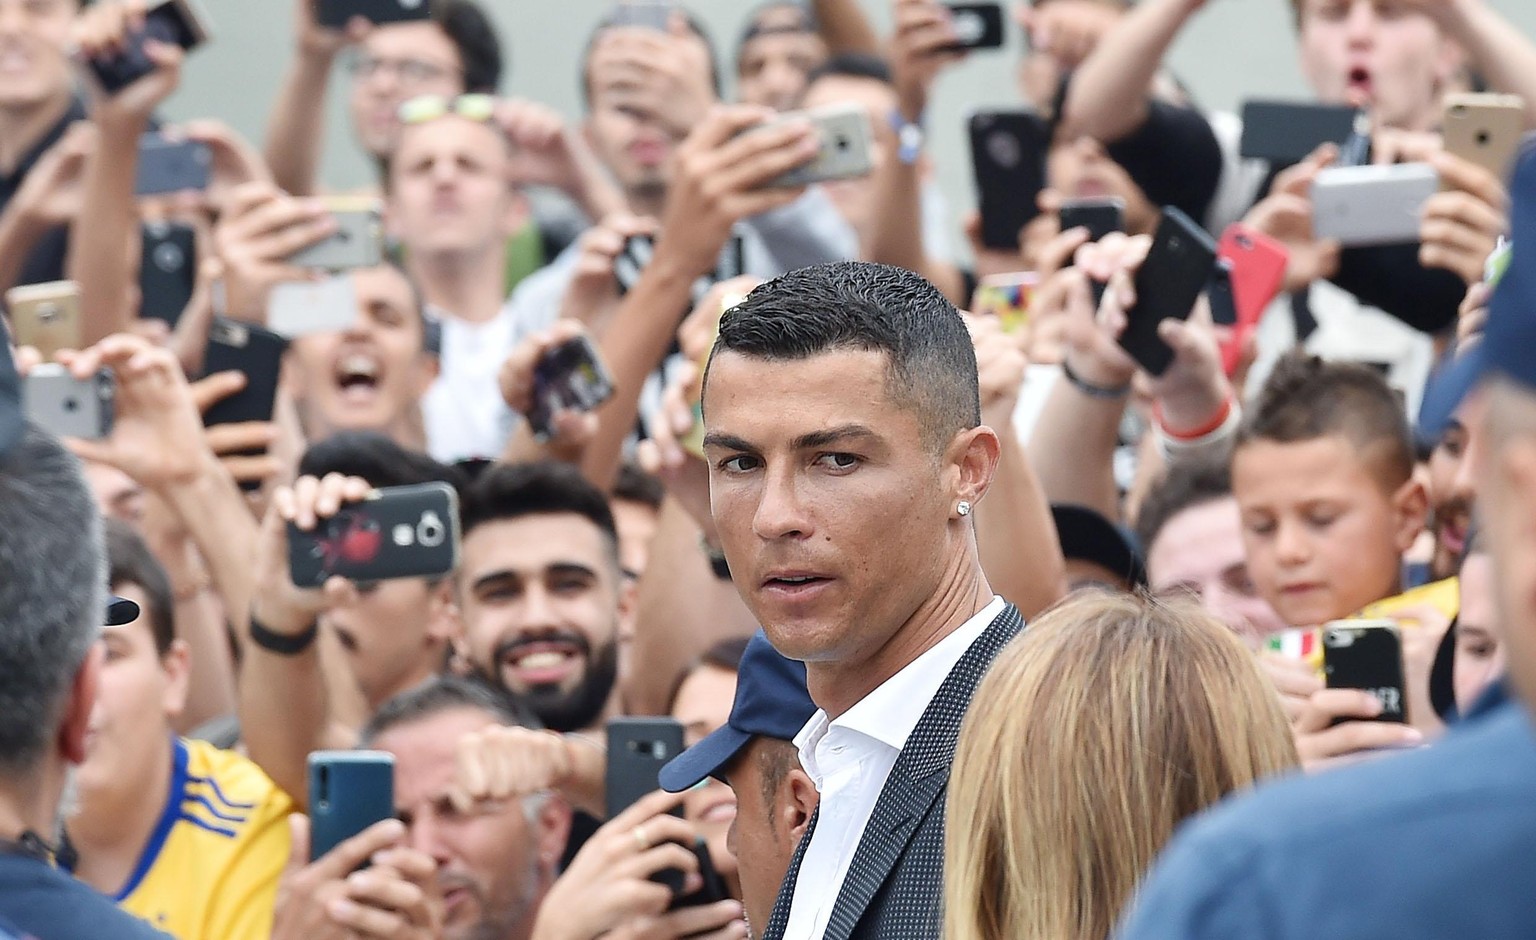 epa06892564 New Juventus soccer player Cristiano Ronaldo (C) of Portugal arrives at Juventus J Medical in Turin, Italy, 16 July 2018. Cristiano Ronaldo joins Italian Serie A side Juventus FC. EPA/ALES ...